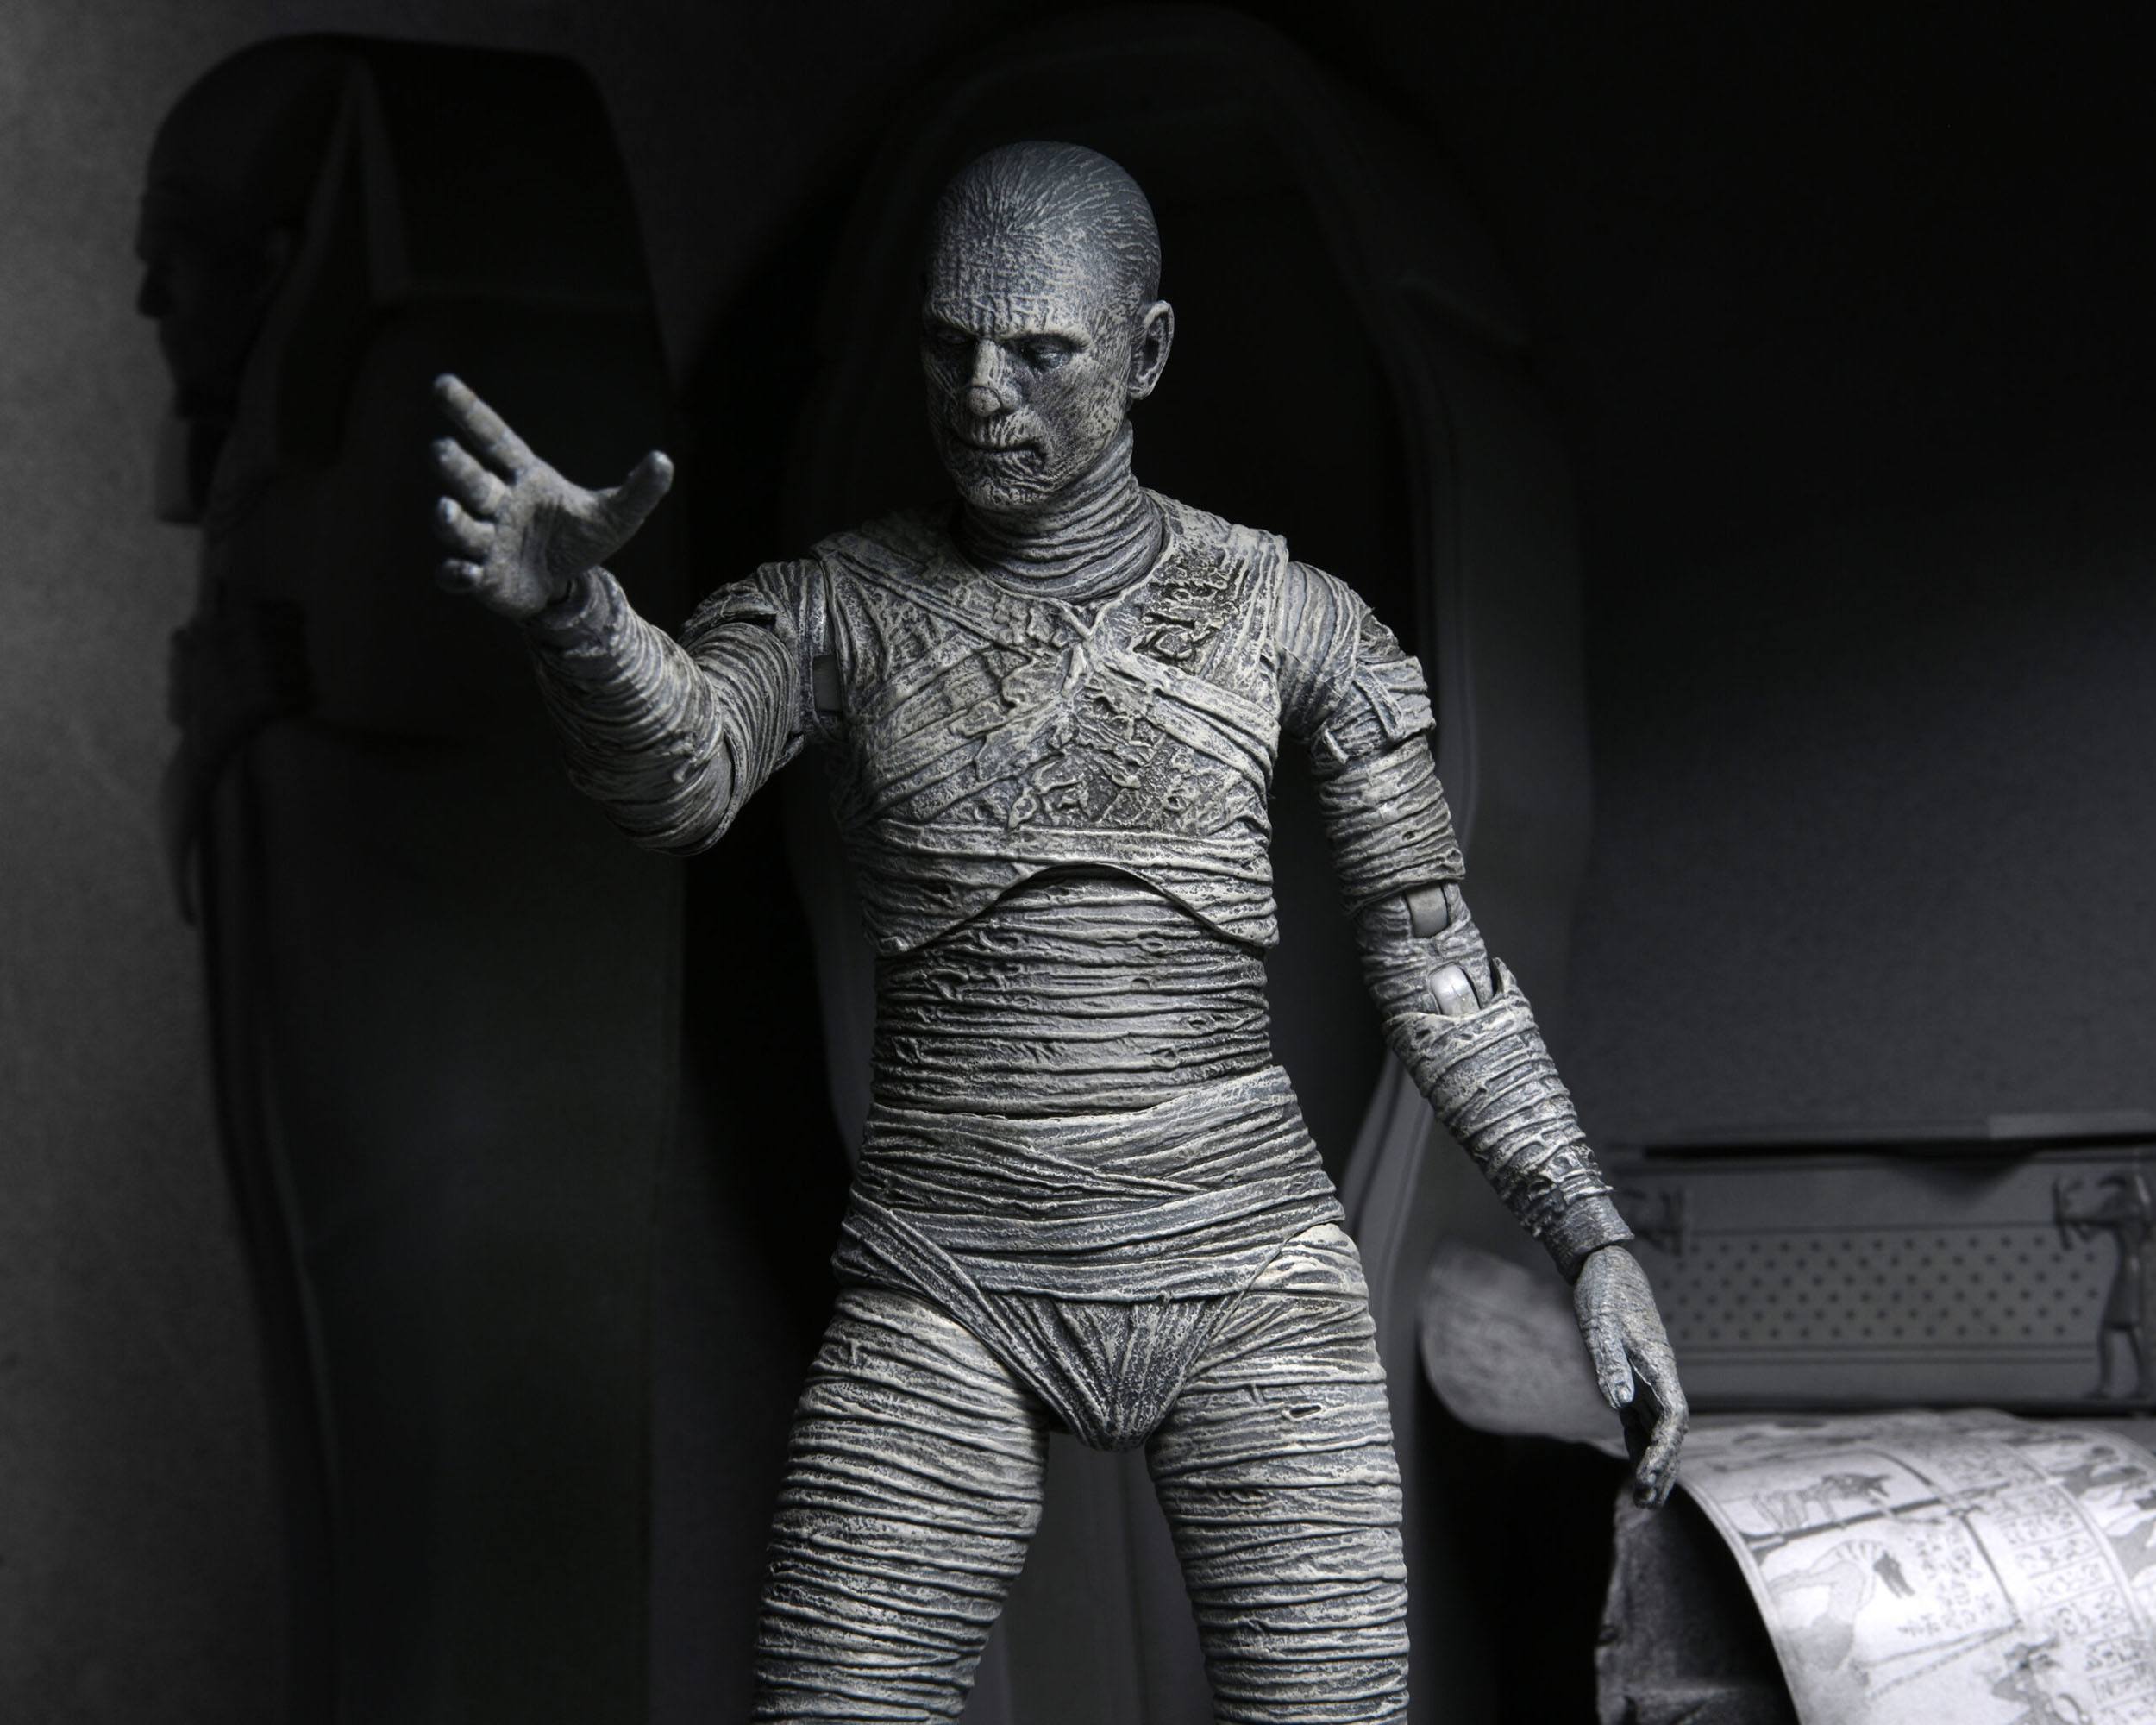 Universal Monsters Actionfigur Ultimate The Mummy (Black & White) 18 cm NECA04812 634482048122